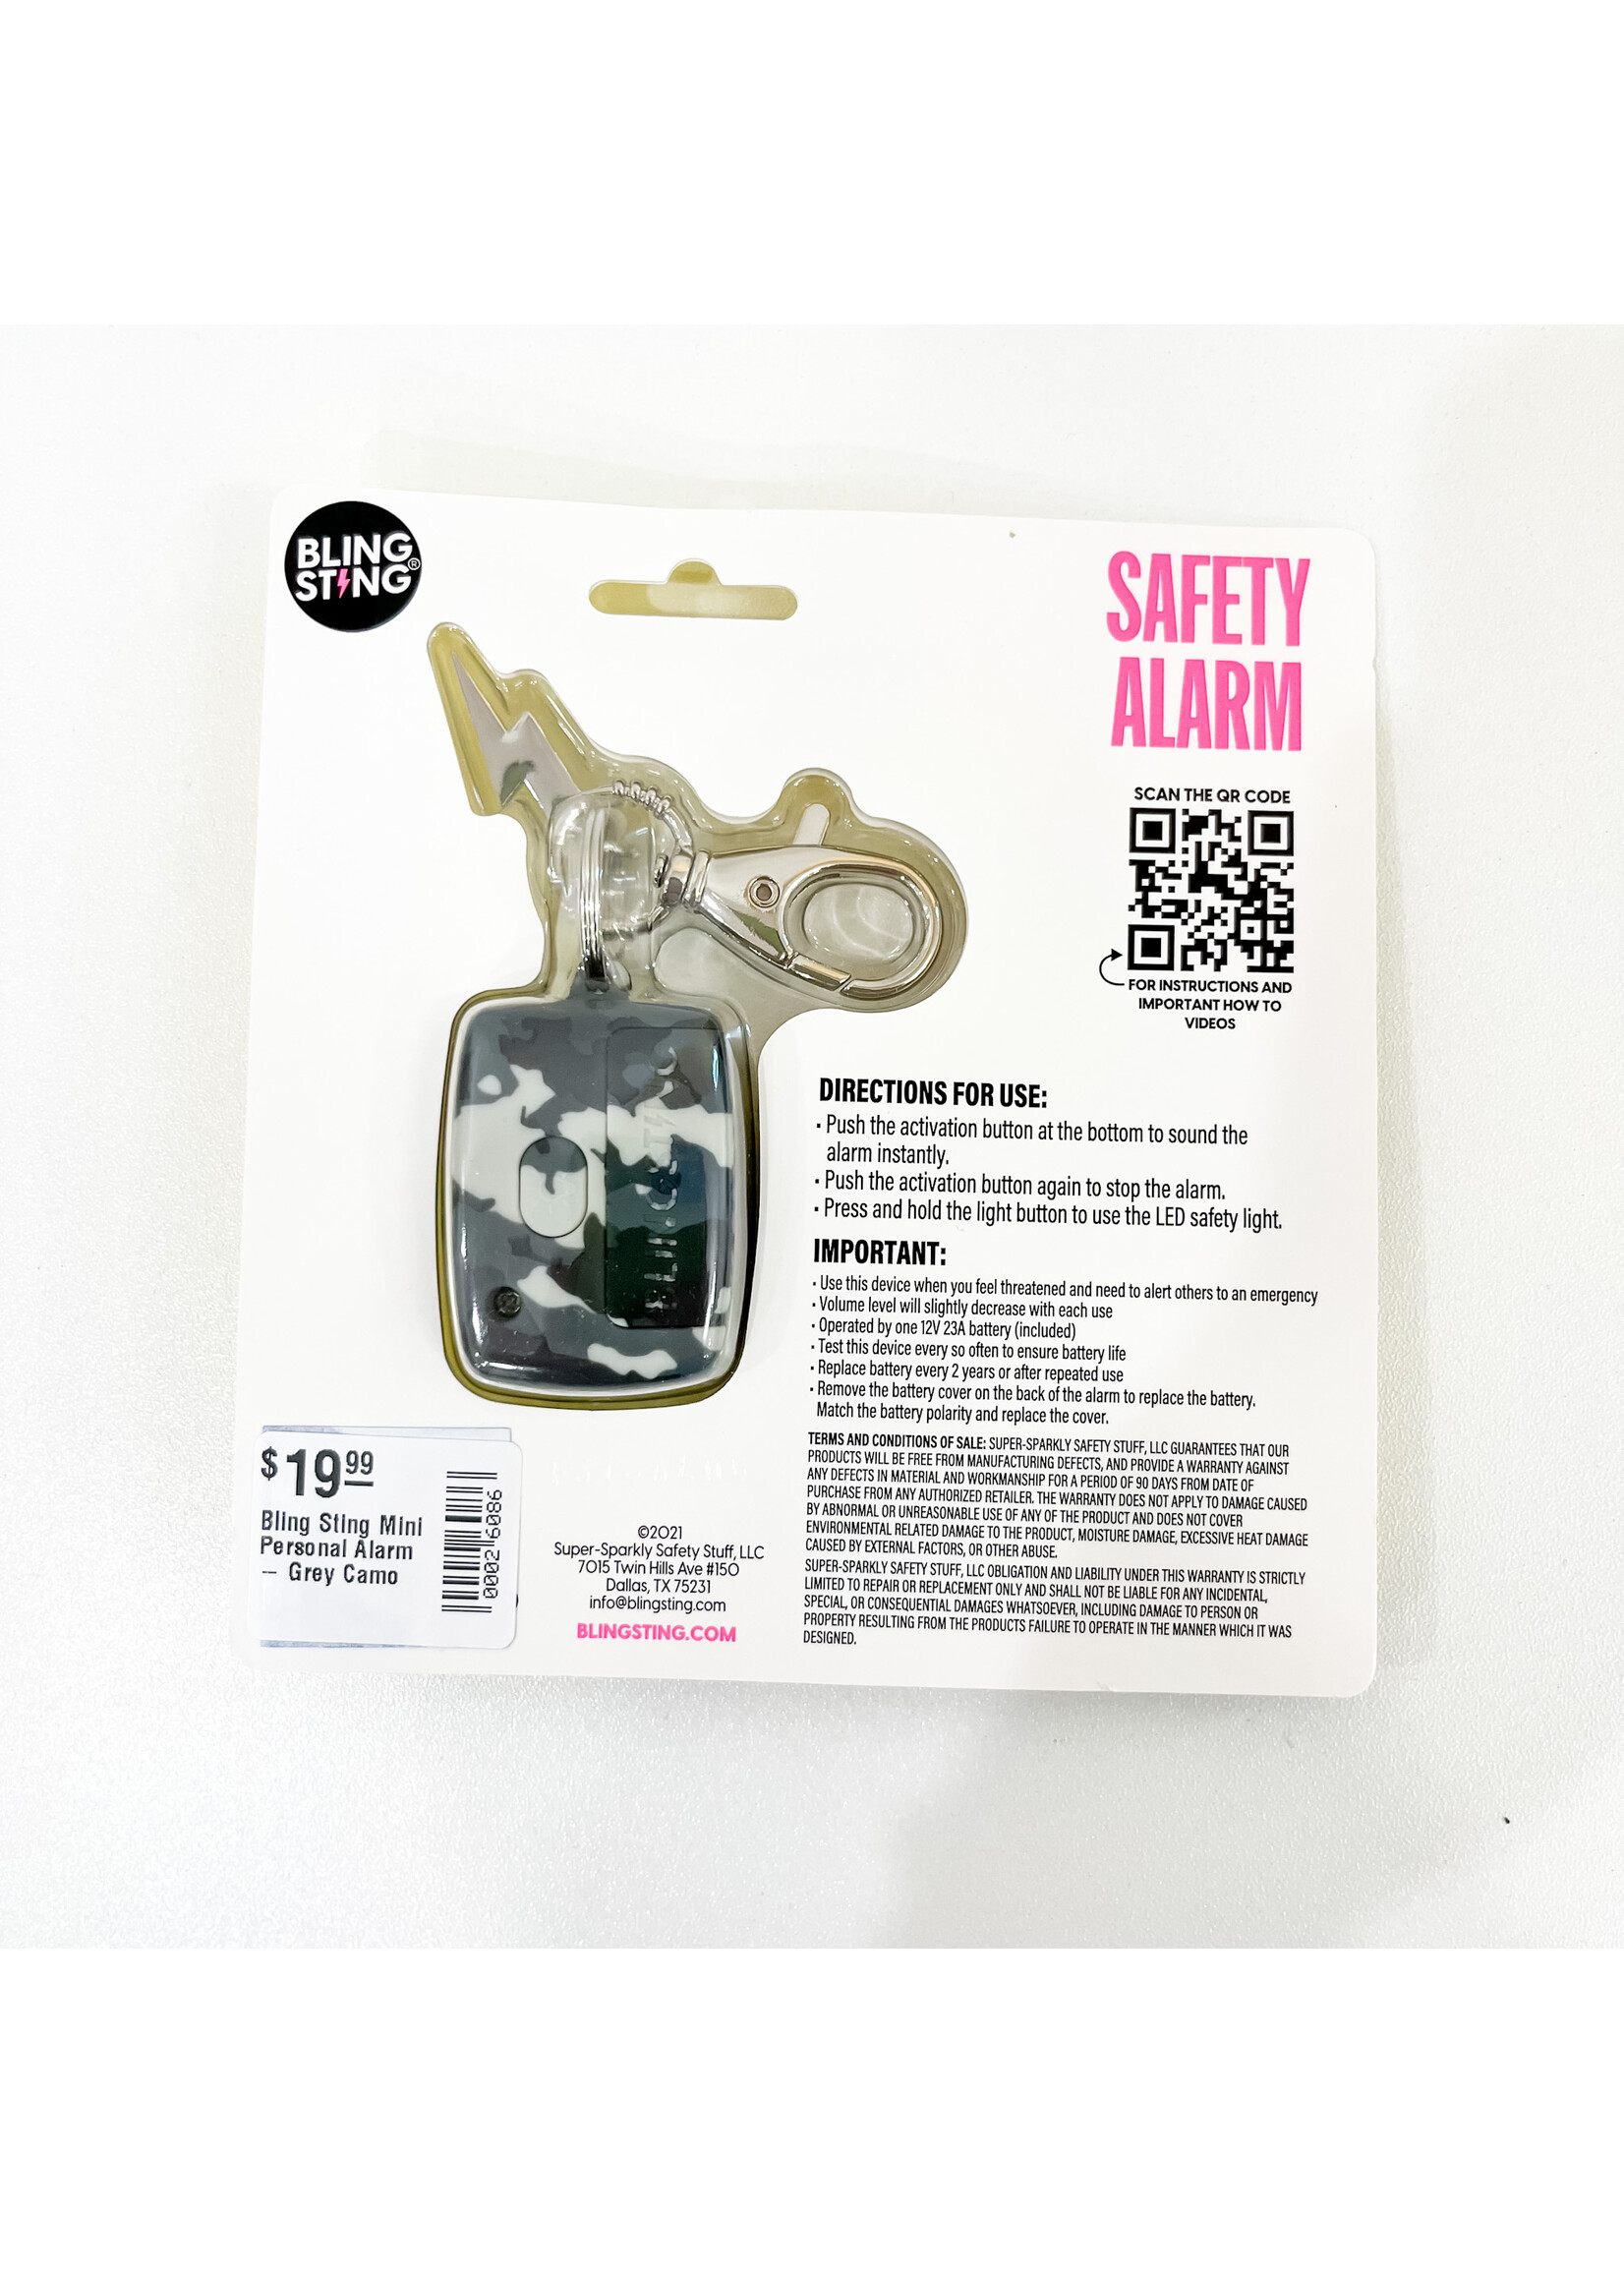 Bling Sting Mini Personal Alarm - Grey Camo - Ramsey Rae by The